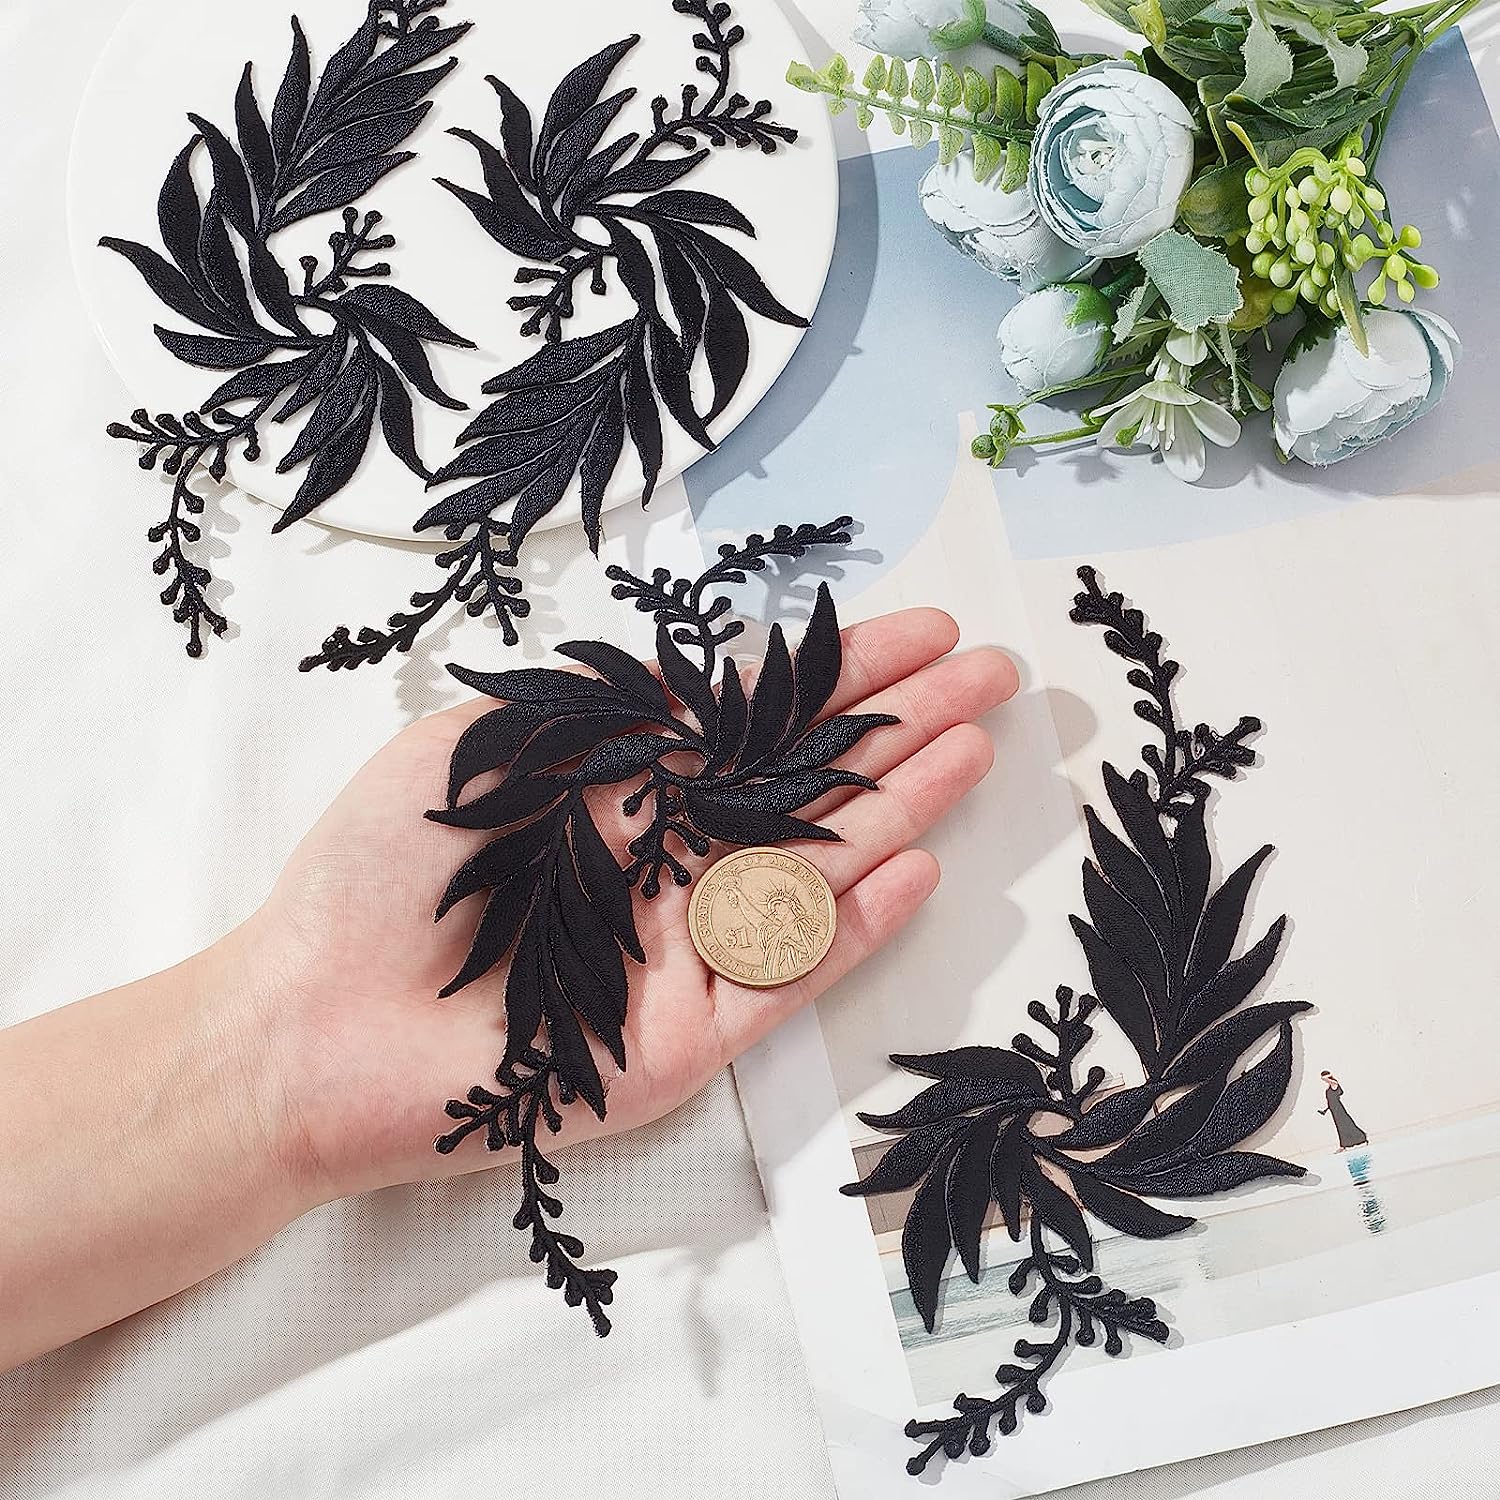 2Pairs 4PCS Leaf Iron Patches Big Embroidered Flowers Lace Applique Flowers Nature Patches Suitable - image 4 of 9